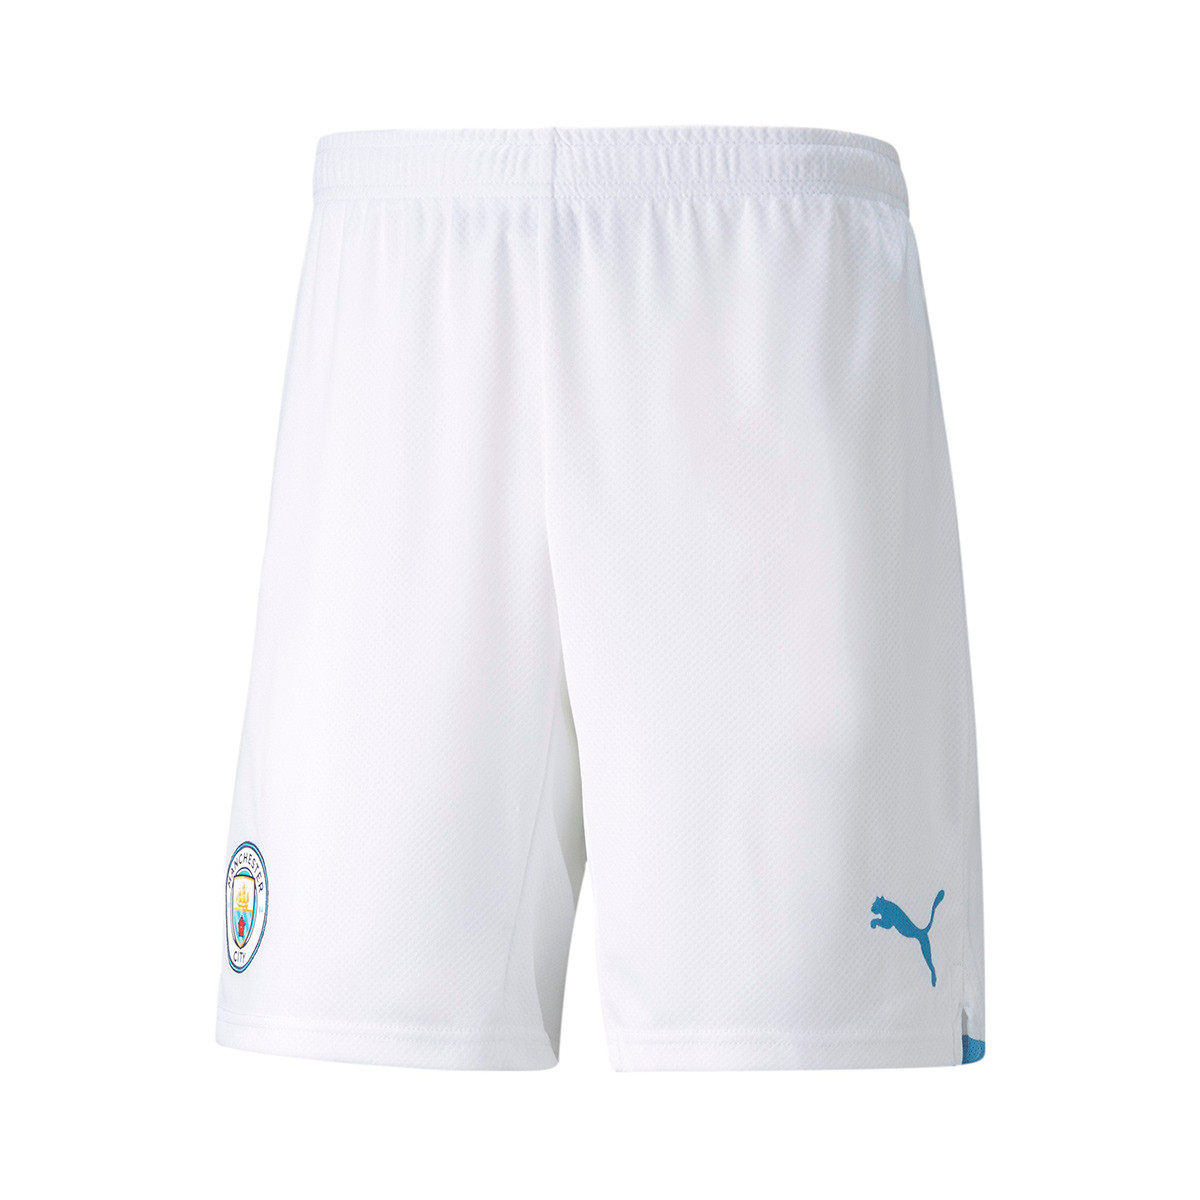 Boys Shorts Manchester City F.C 2-Pack Cotton Shorts Man City Gifts for Boys 